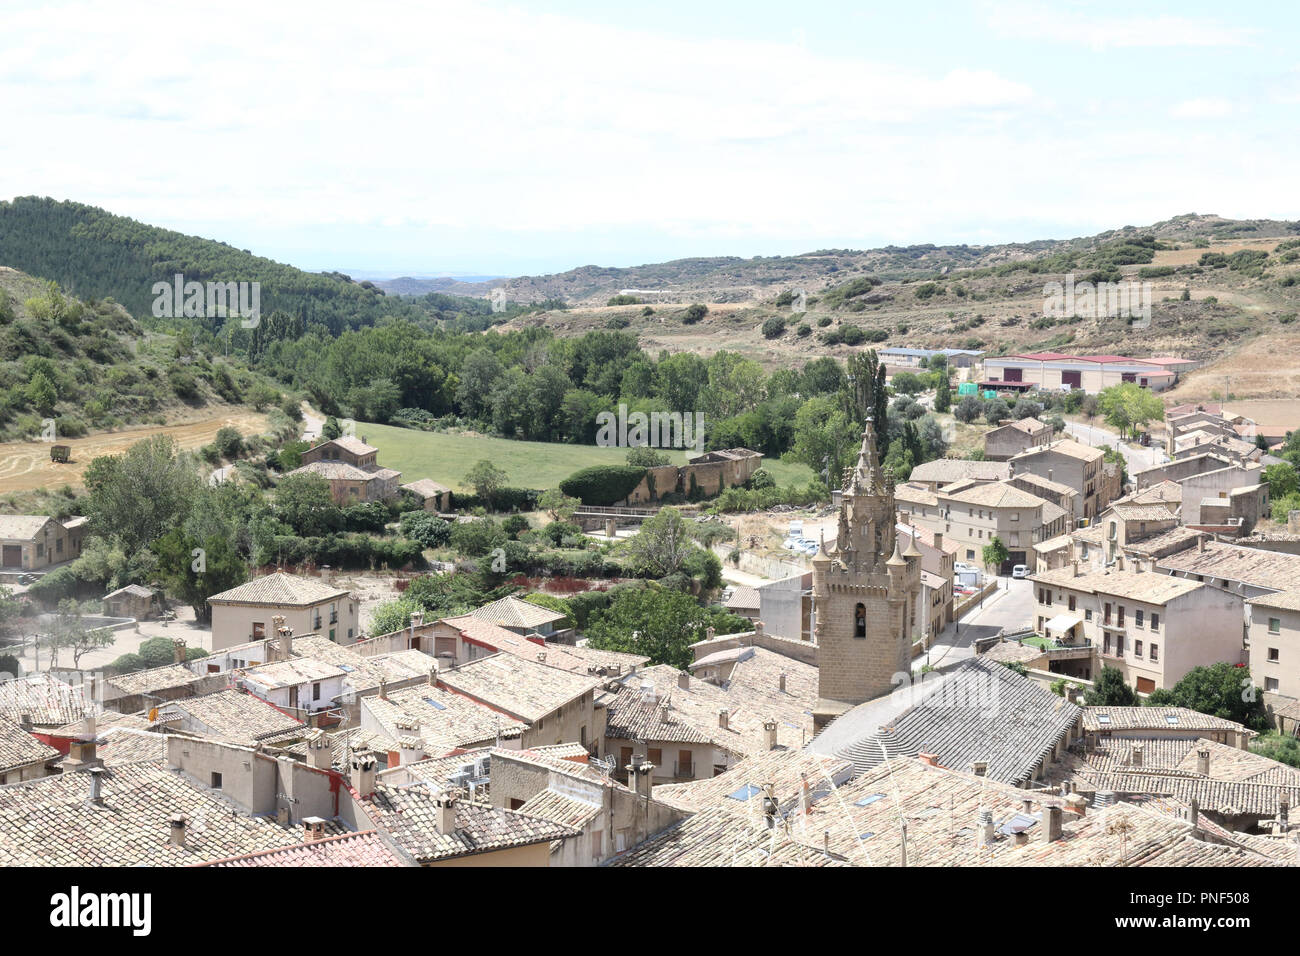 A landscape of Uncastillo, a small rural town in the Pre-Pyrenees in the Aragon region, in Spain Stock Photo